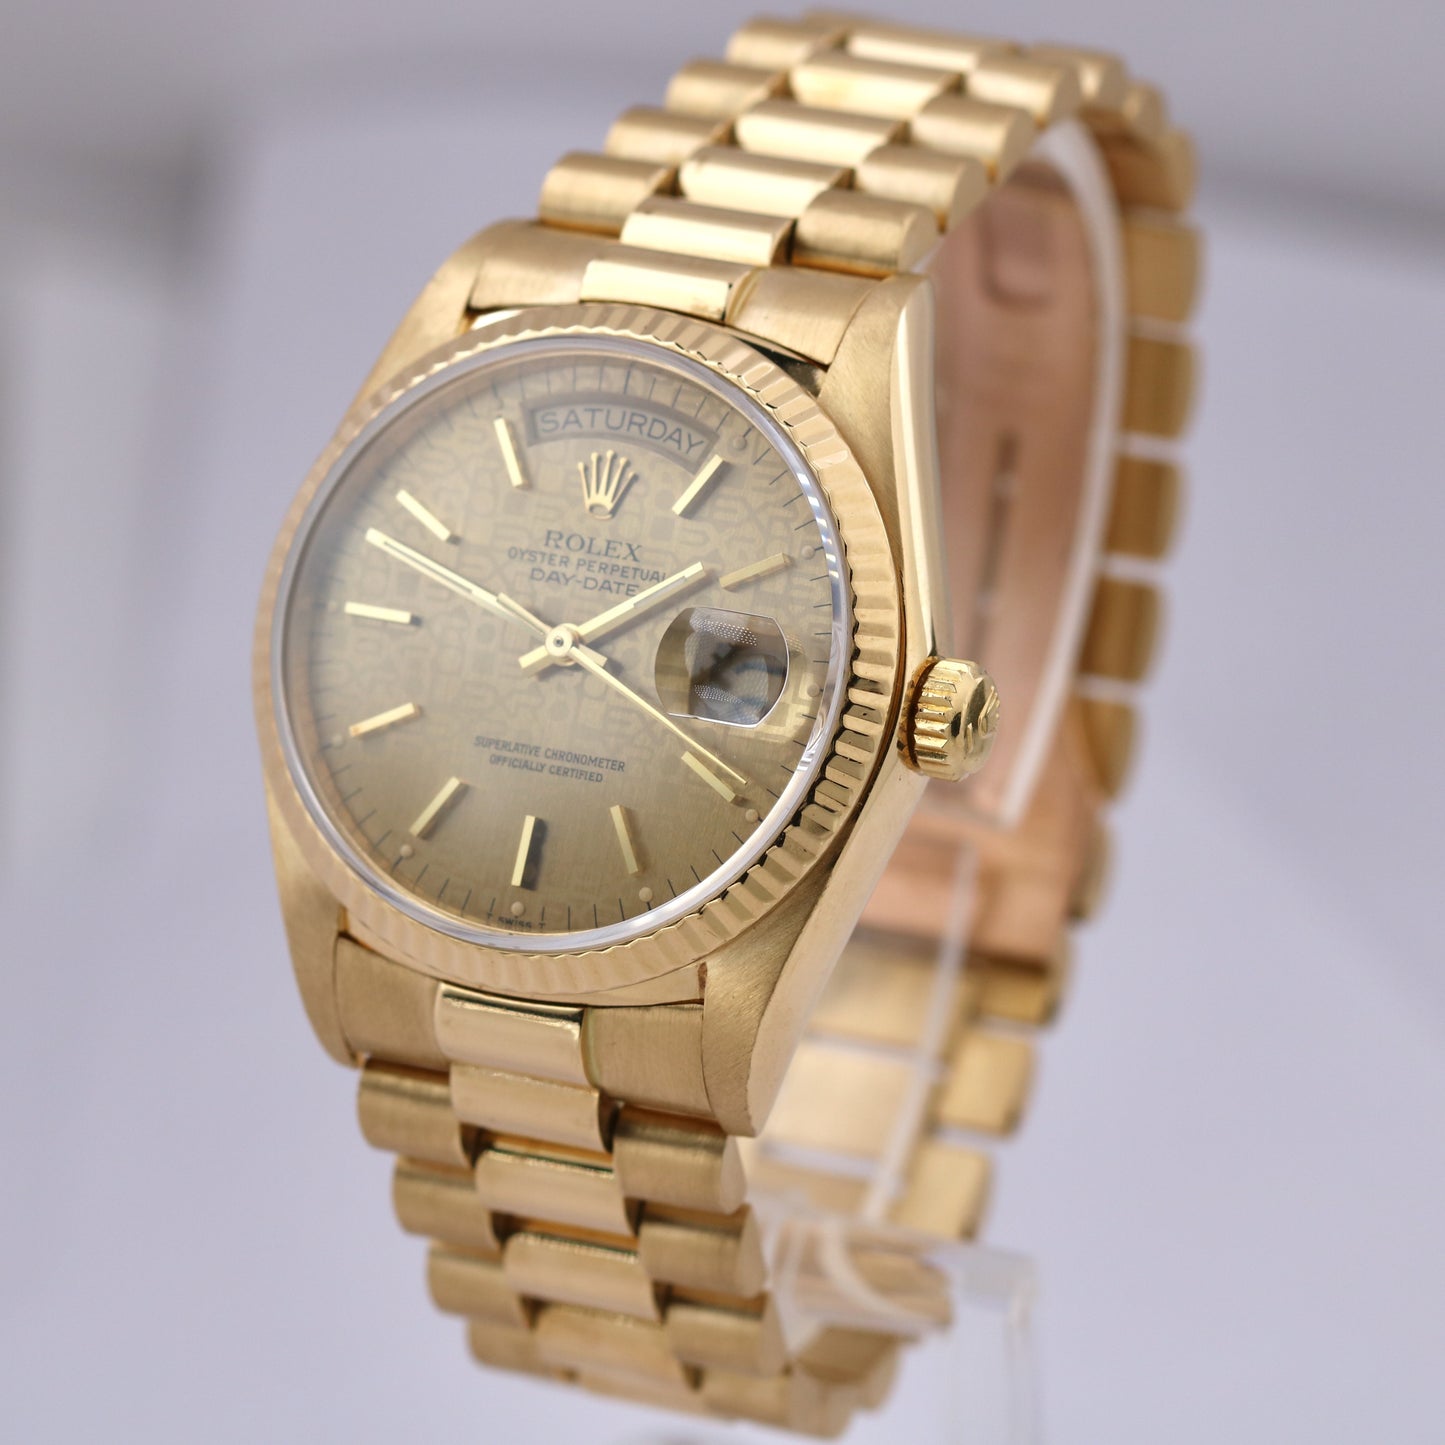 PAPERS Rolex Day-Date President CHAMPAGNE JUBILEE DIAL 36mm 18K Gold 18038 B+P